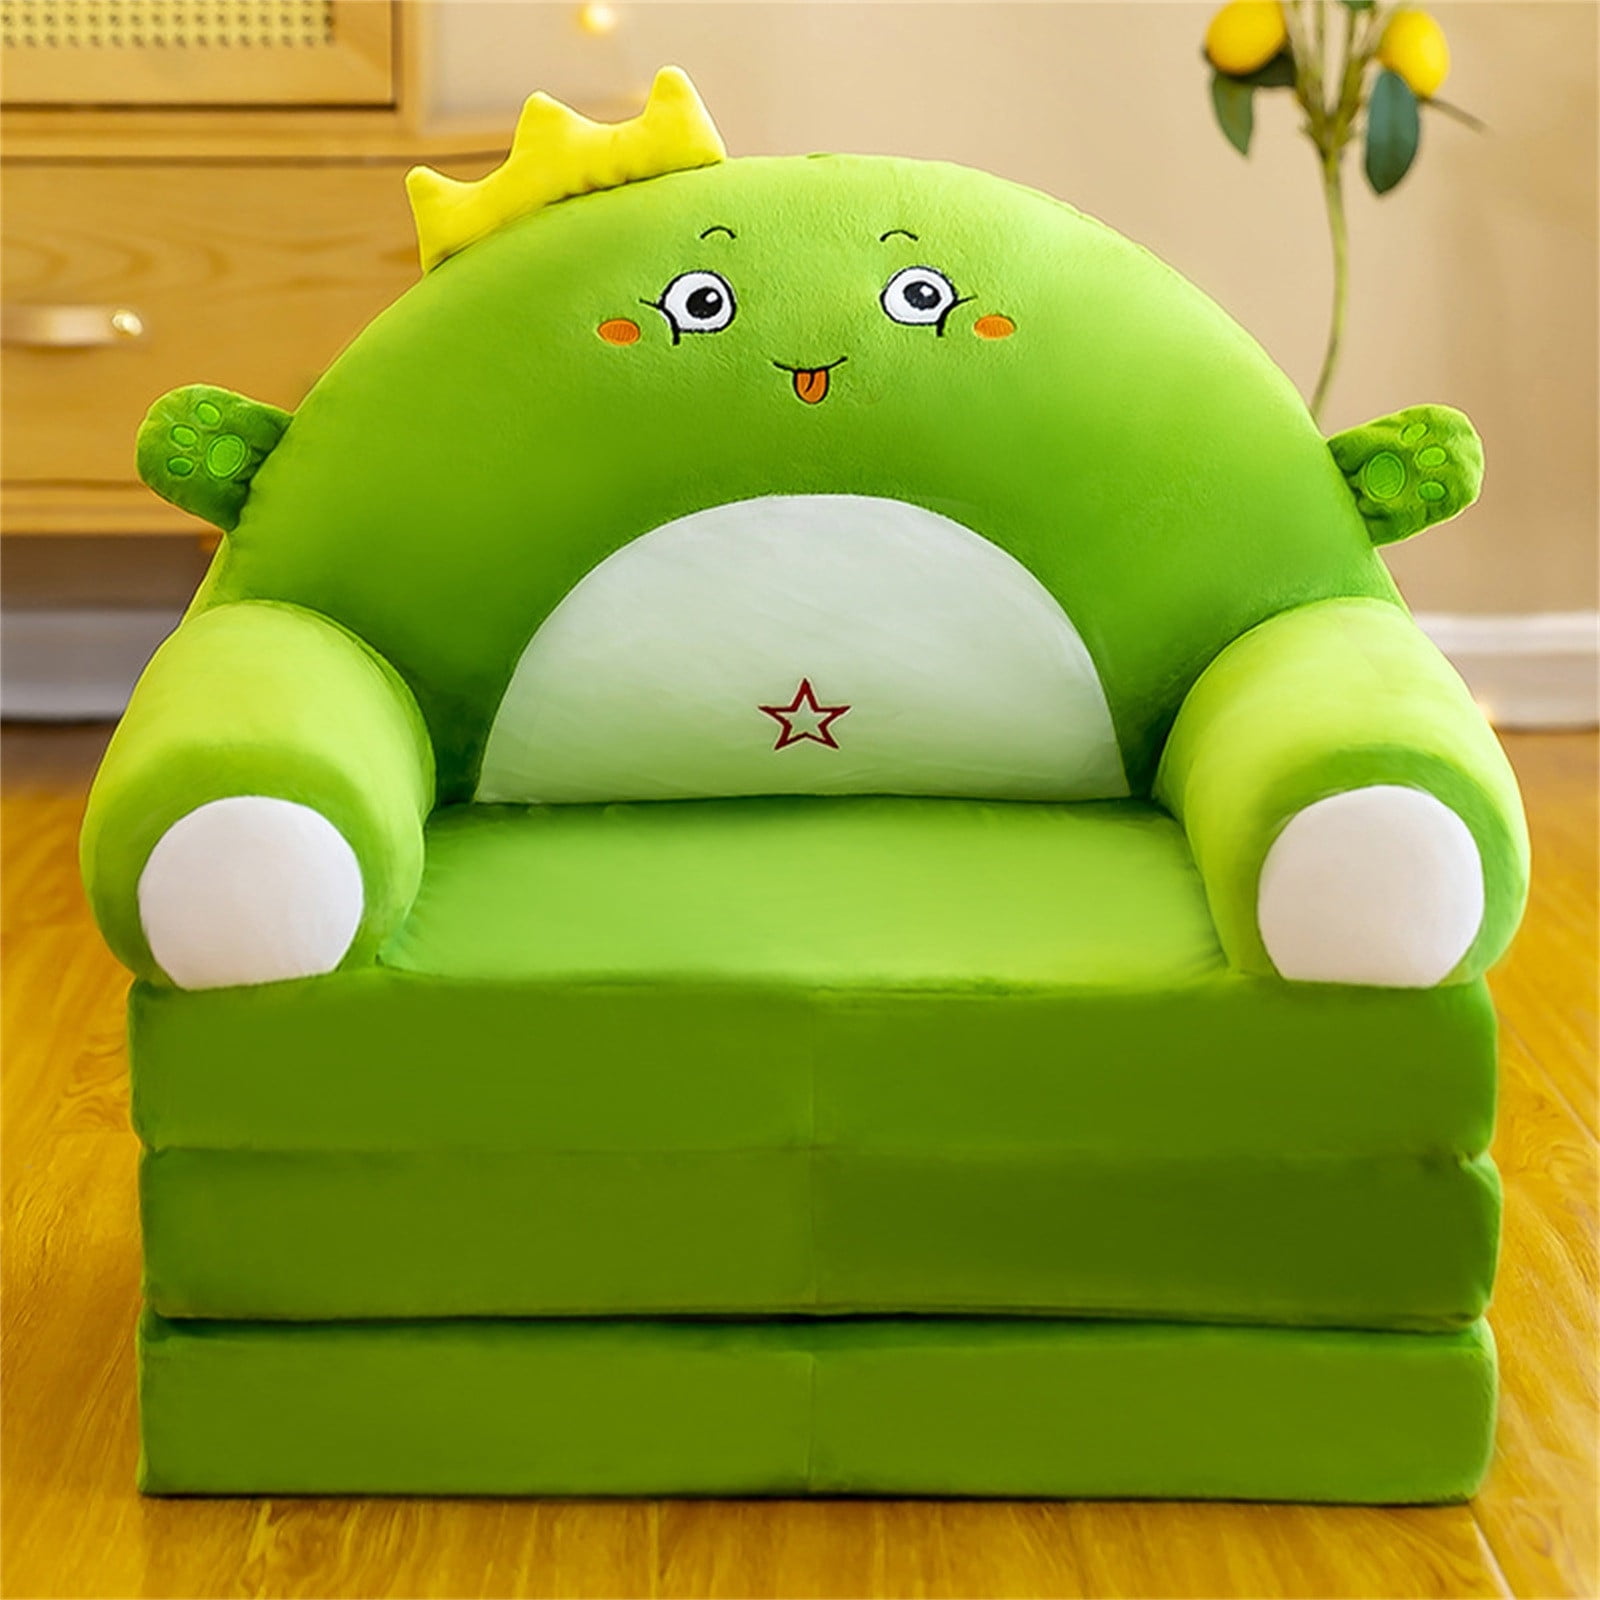 Couch That Go Under The Cushions Seat Risers for Chairs Plush Foldable Kids Sofa Backrest Armchair 2 in 1 Foldable Children Sofa Cute Cartoon Lazy